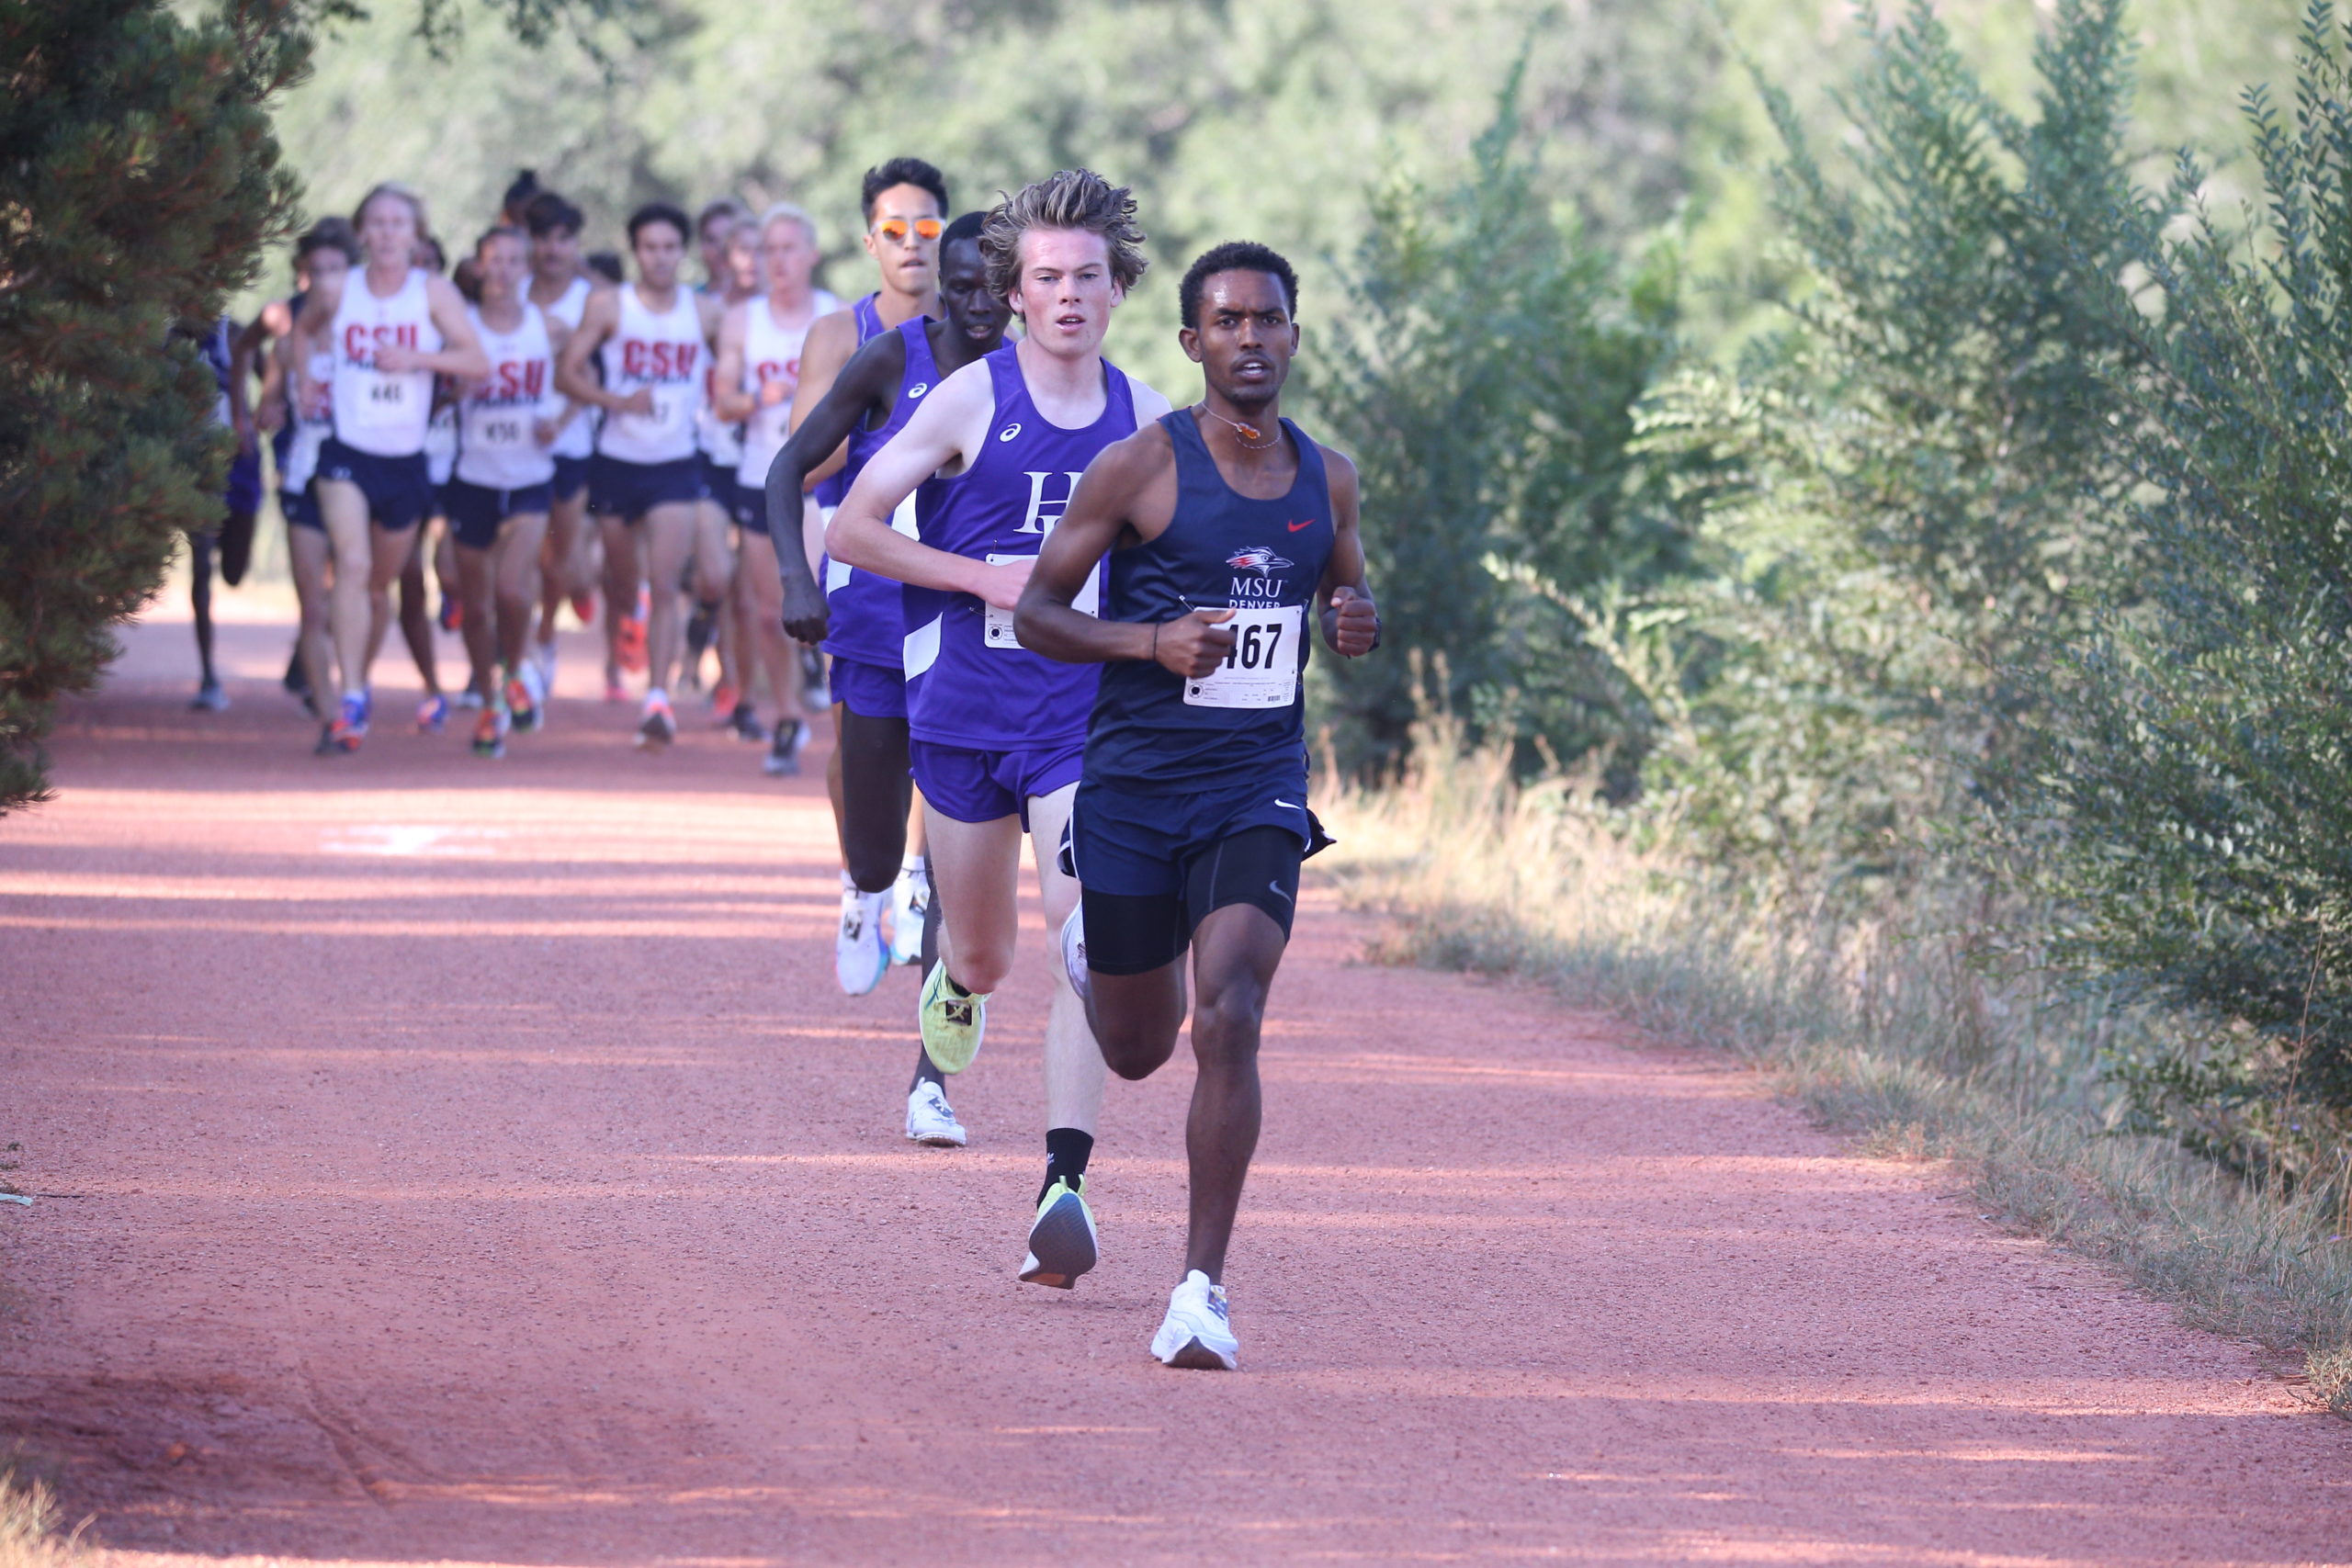 Men's cross country runner Yoni Kefle leads a large pack of runners at a race in 2021.